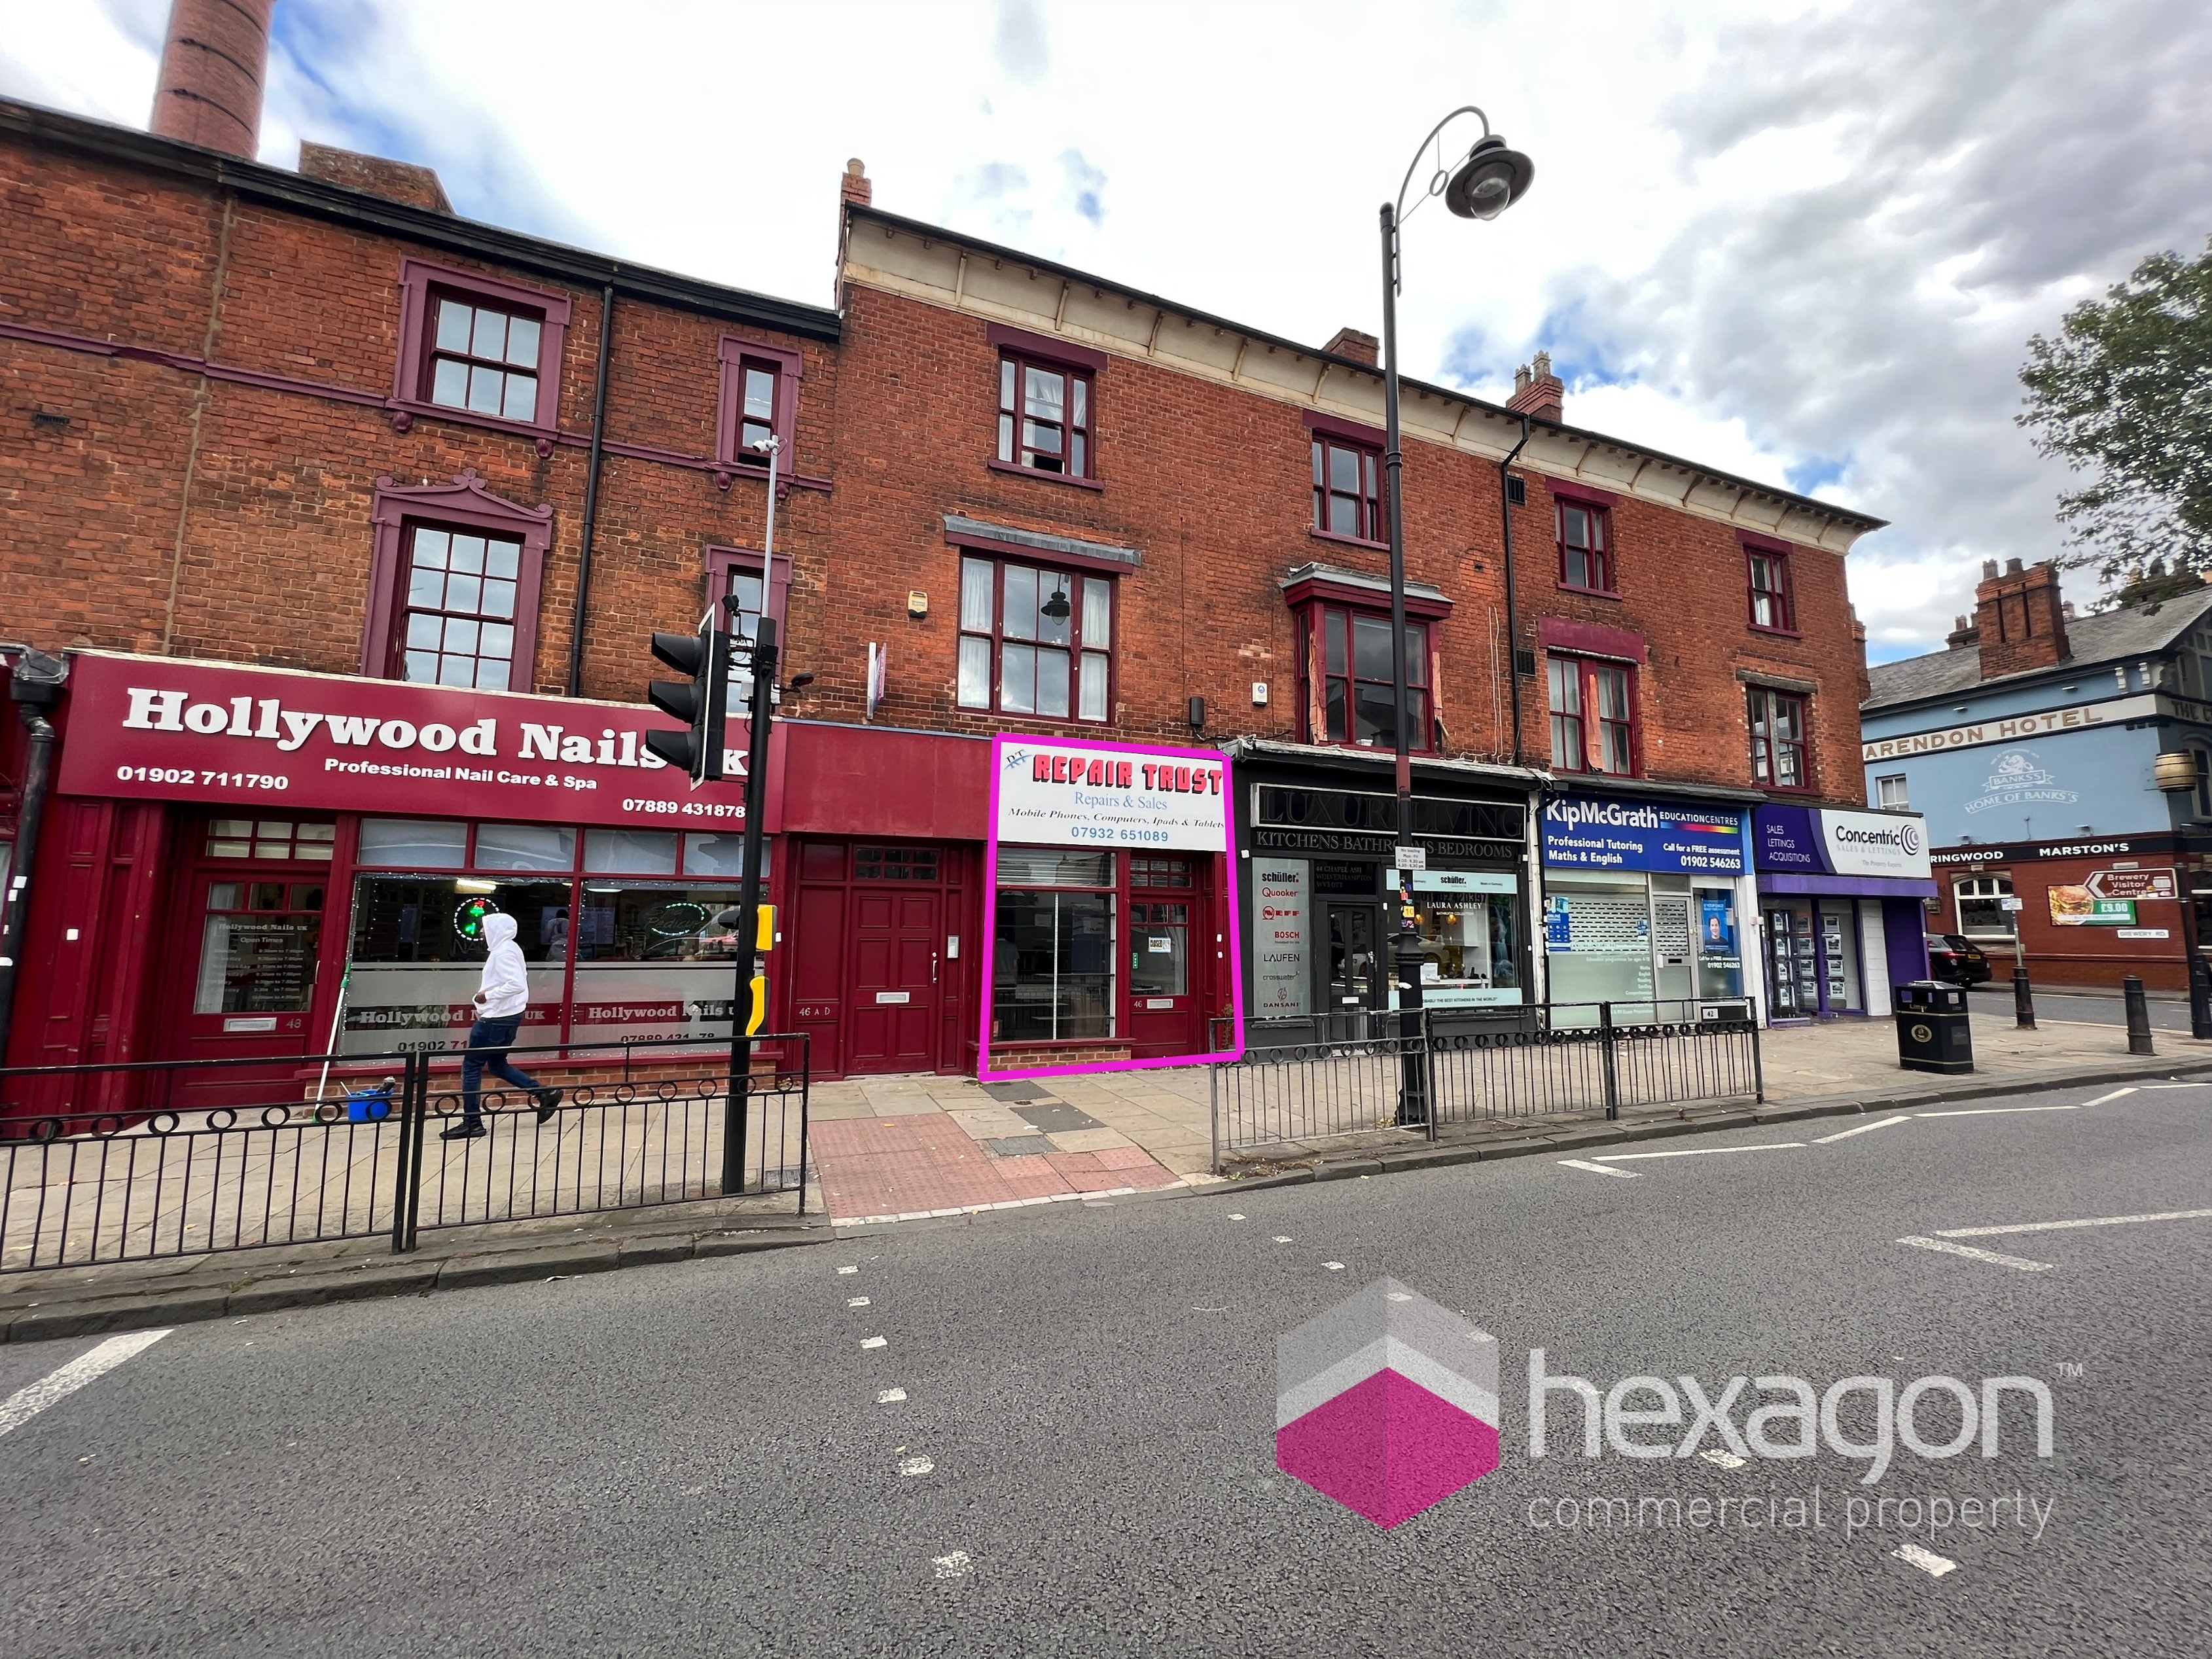 Retail Property (High Street) for rent in Wolverhampton. From Hexagon Commercial Property